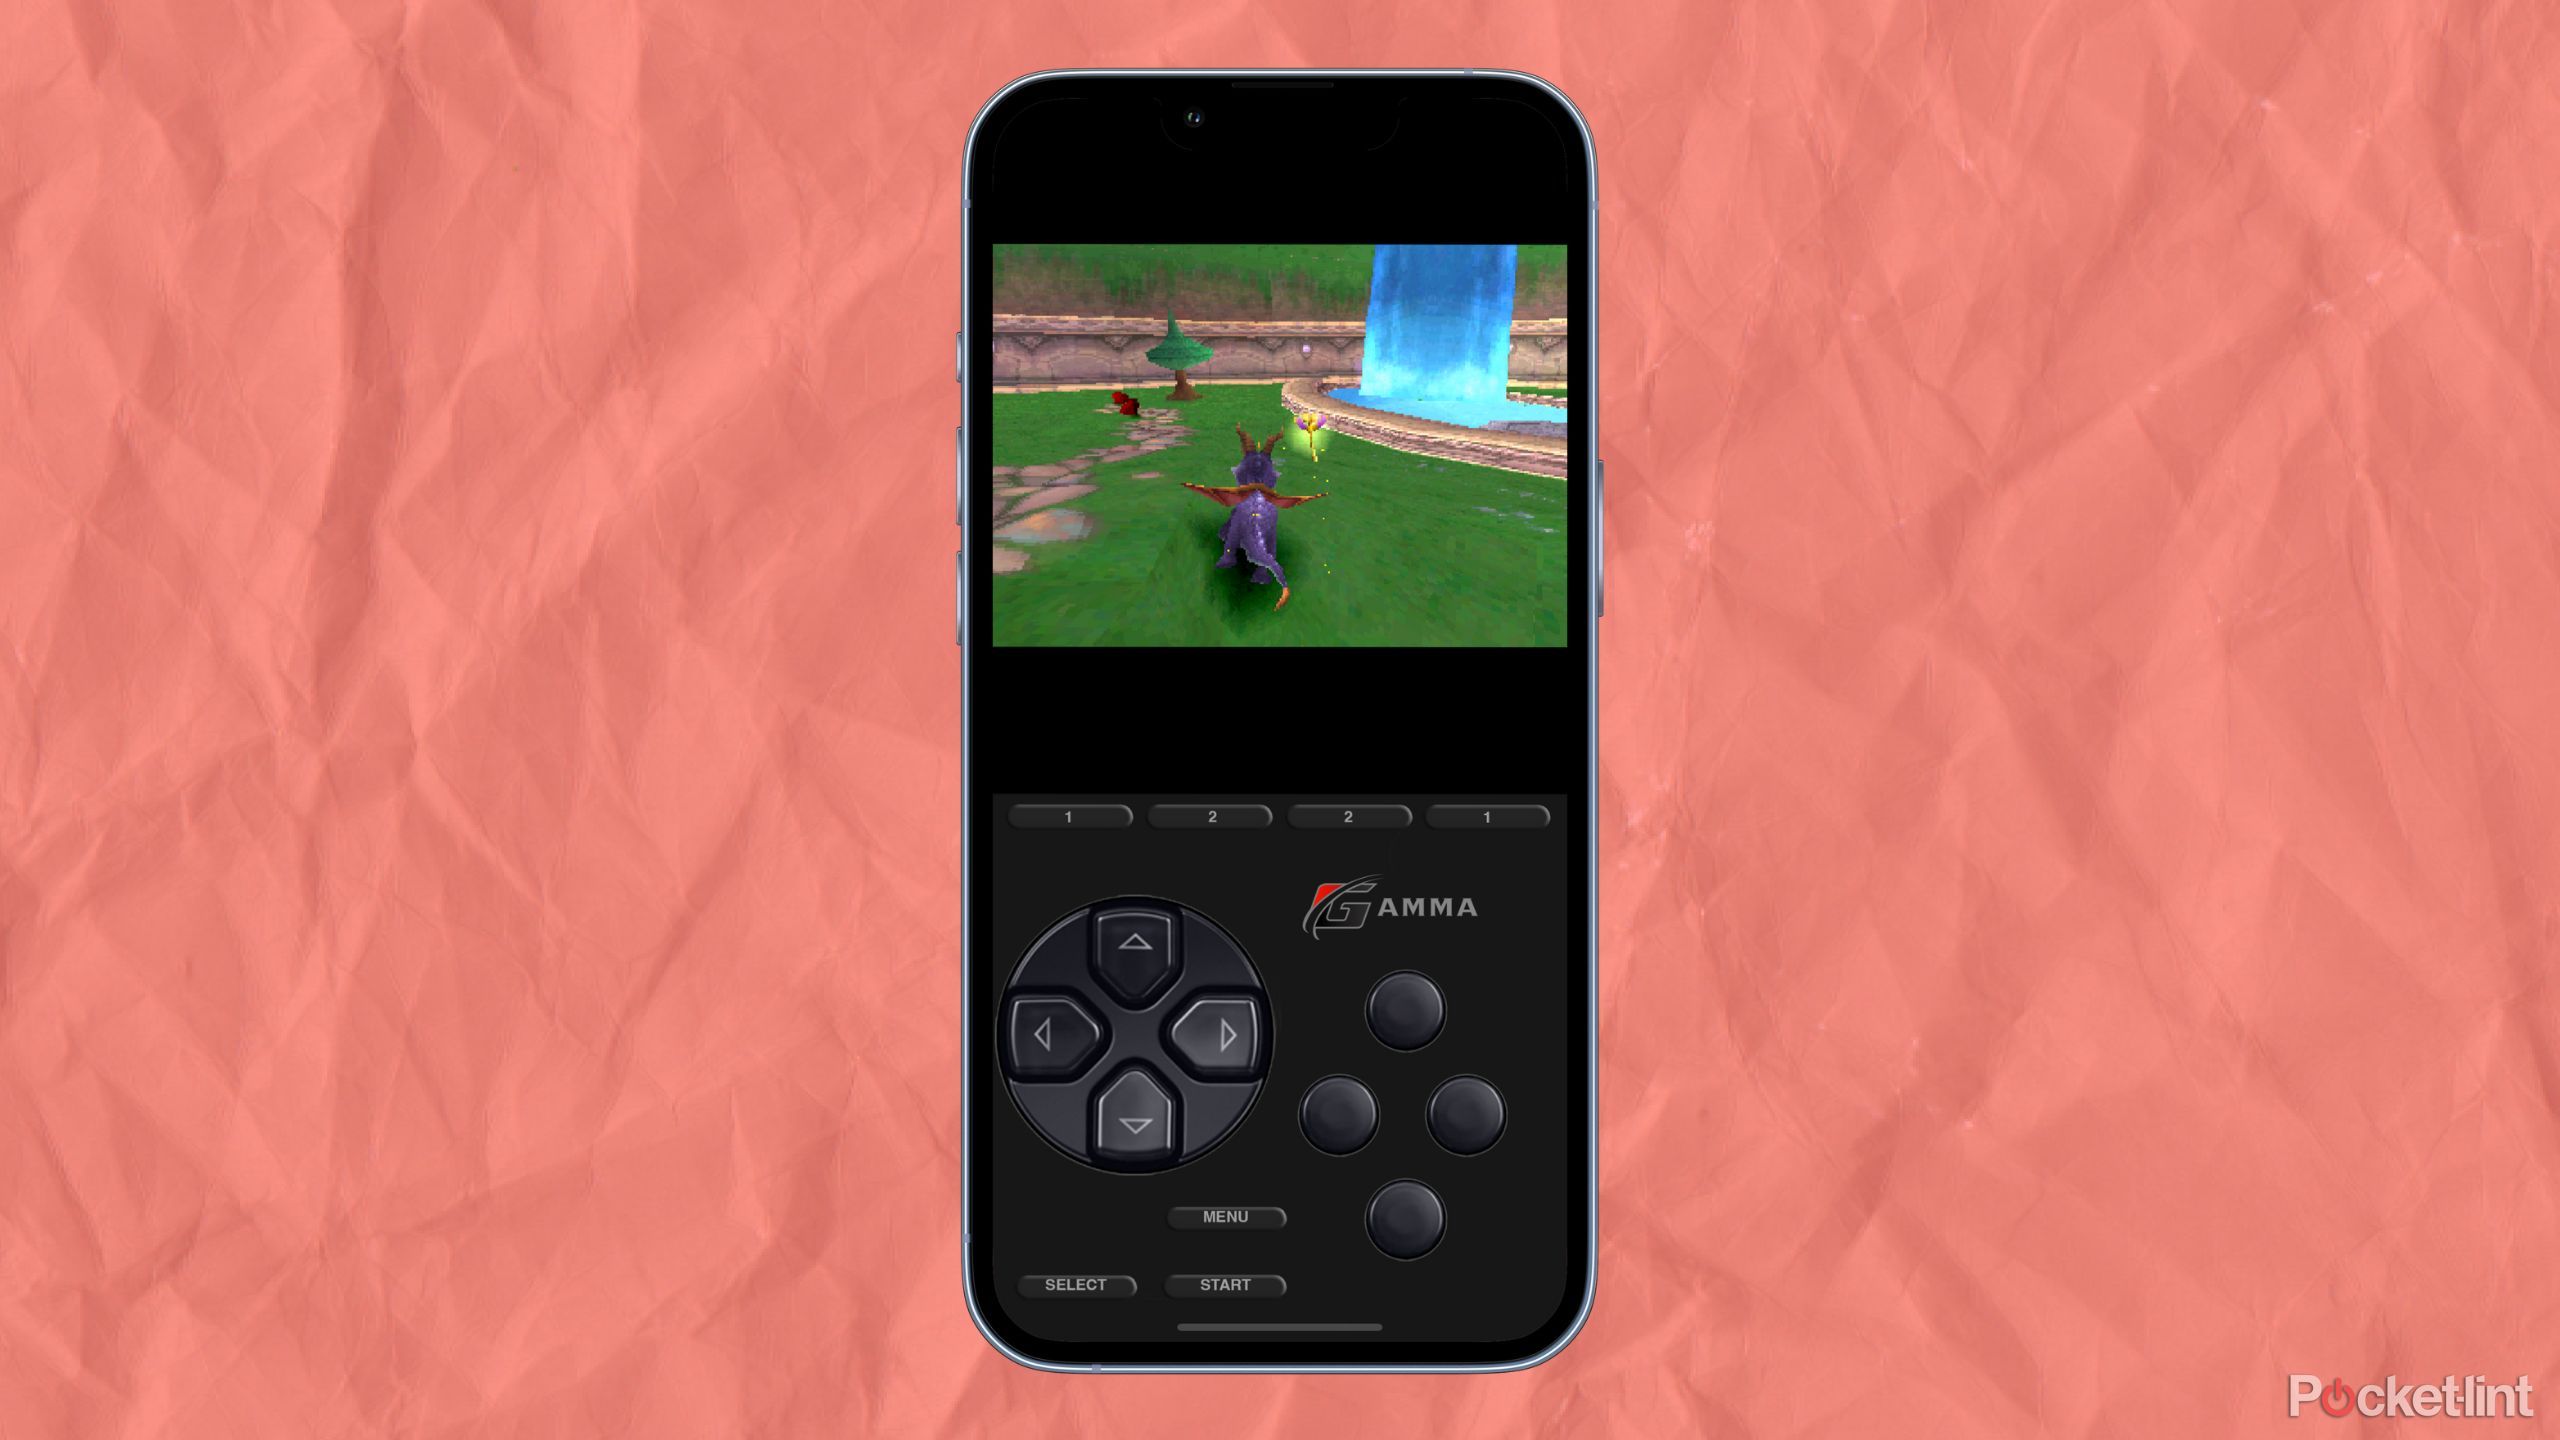 Spyro emulated on an iPhone.